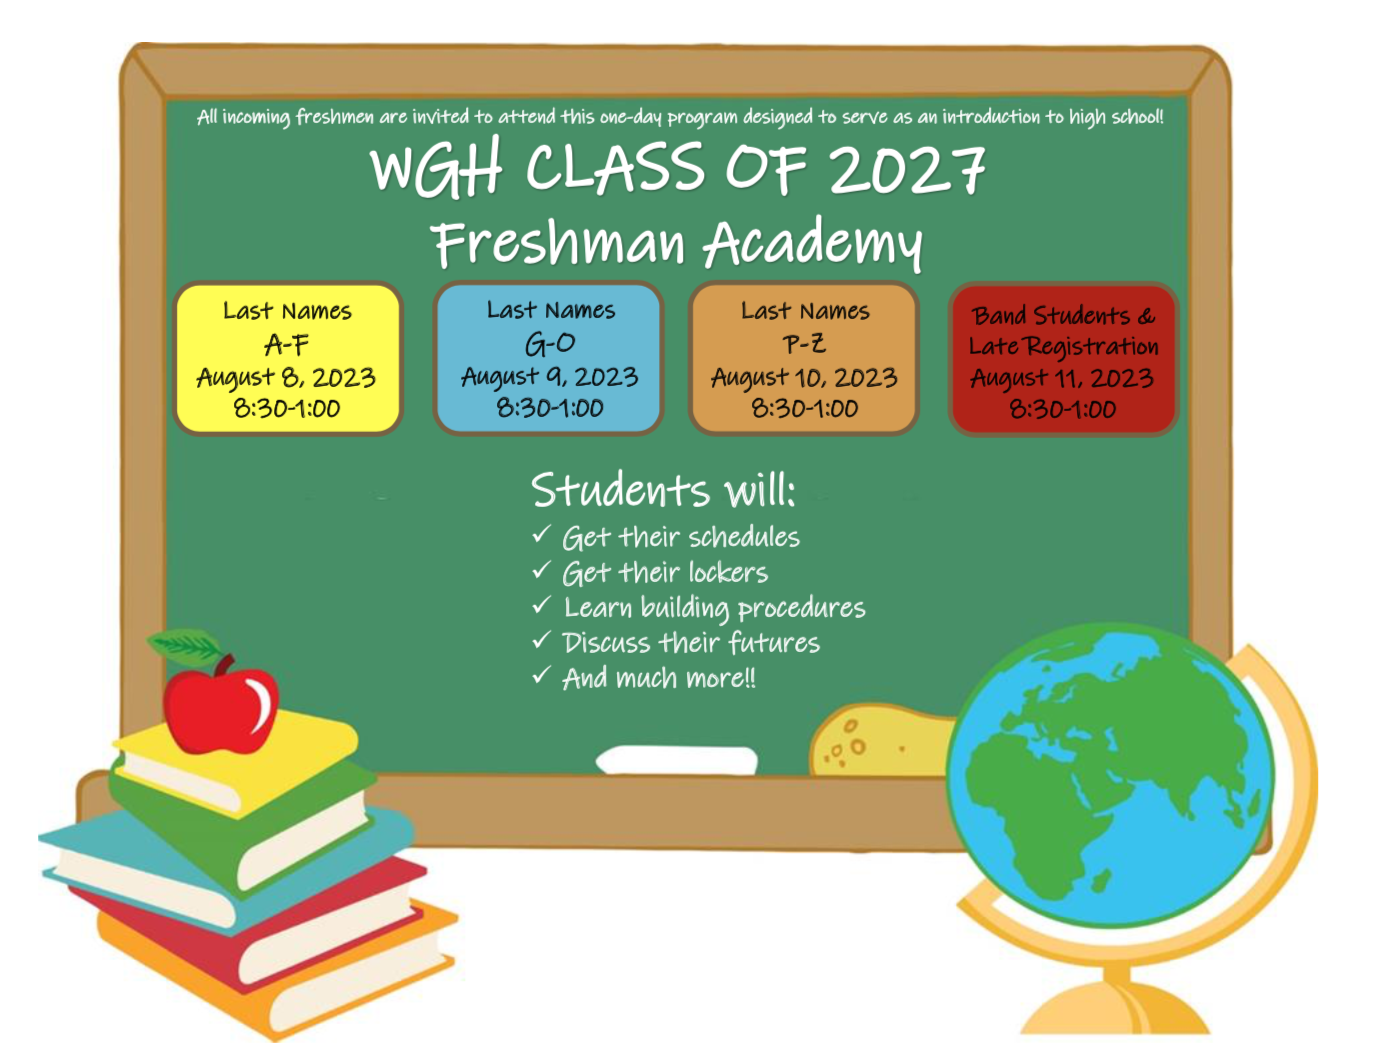 Freshman Academy  offered to the WGH Class  of 2027!